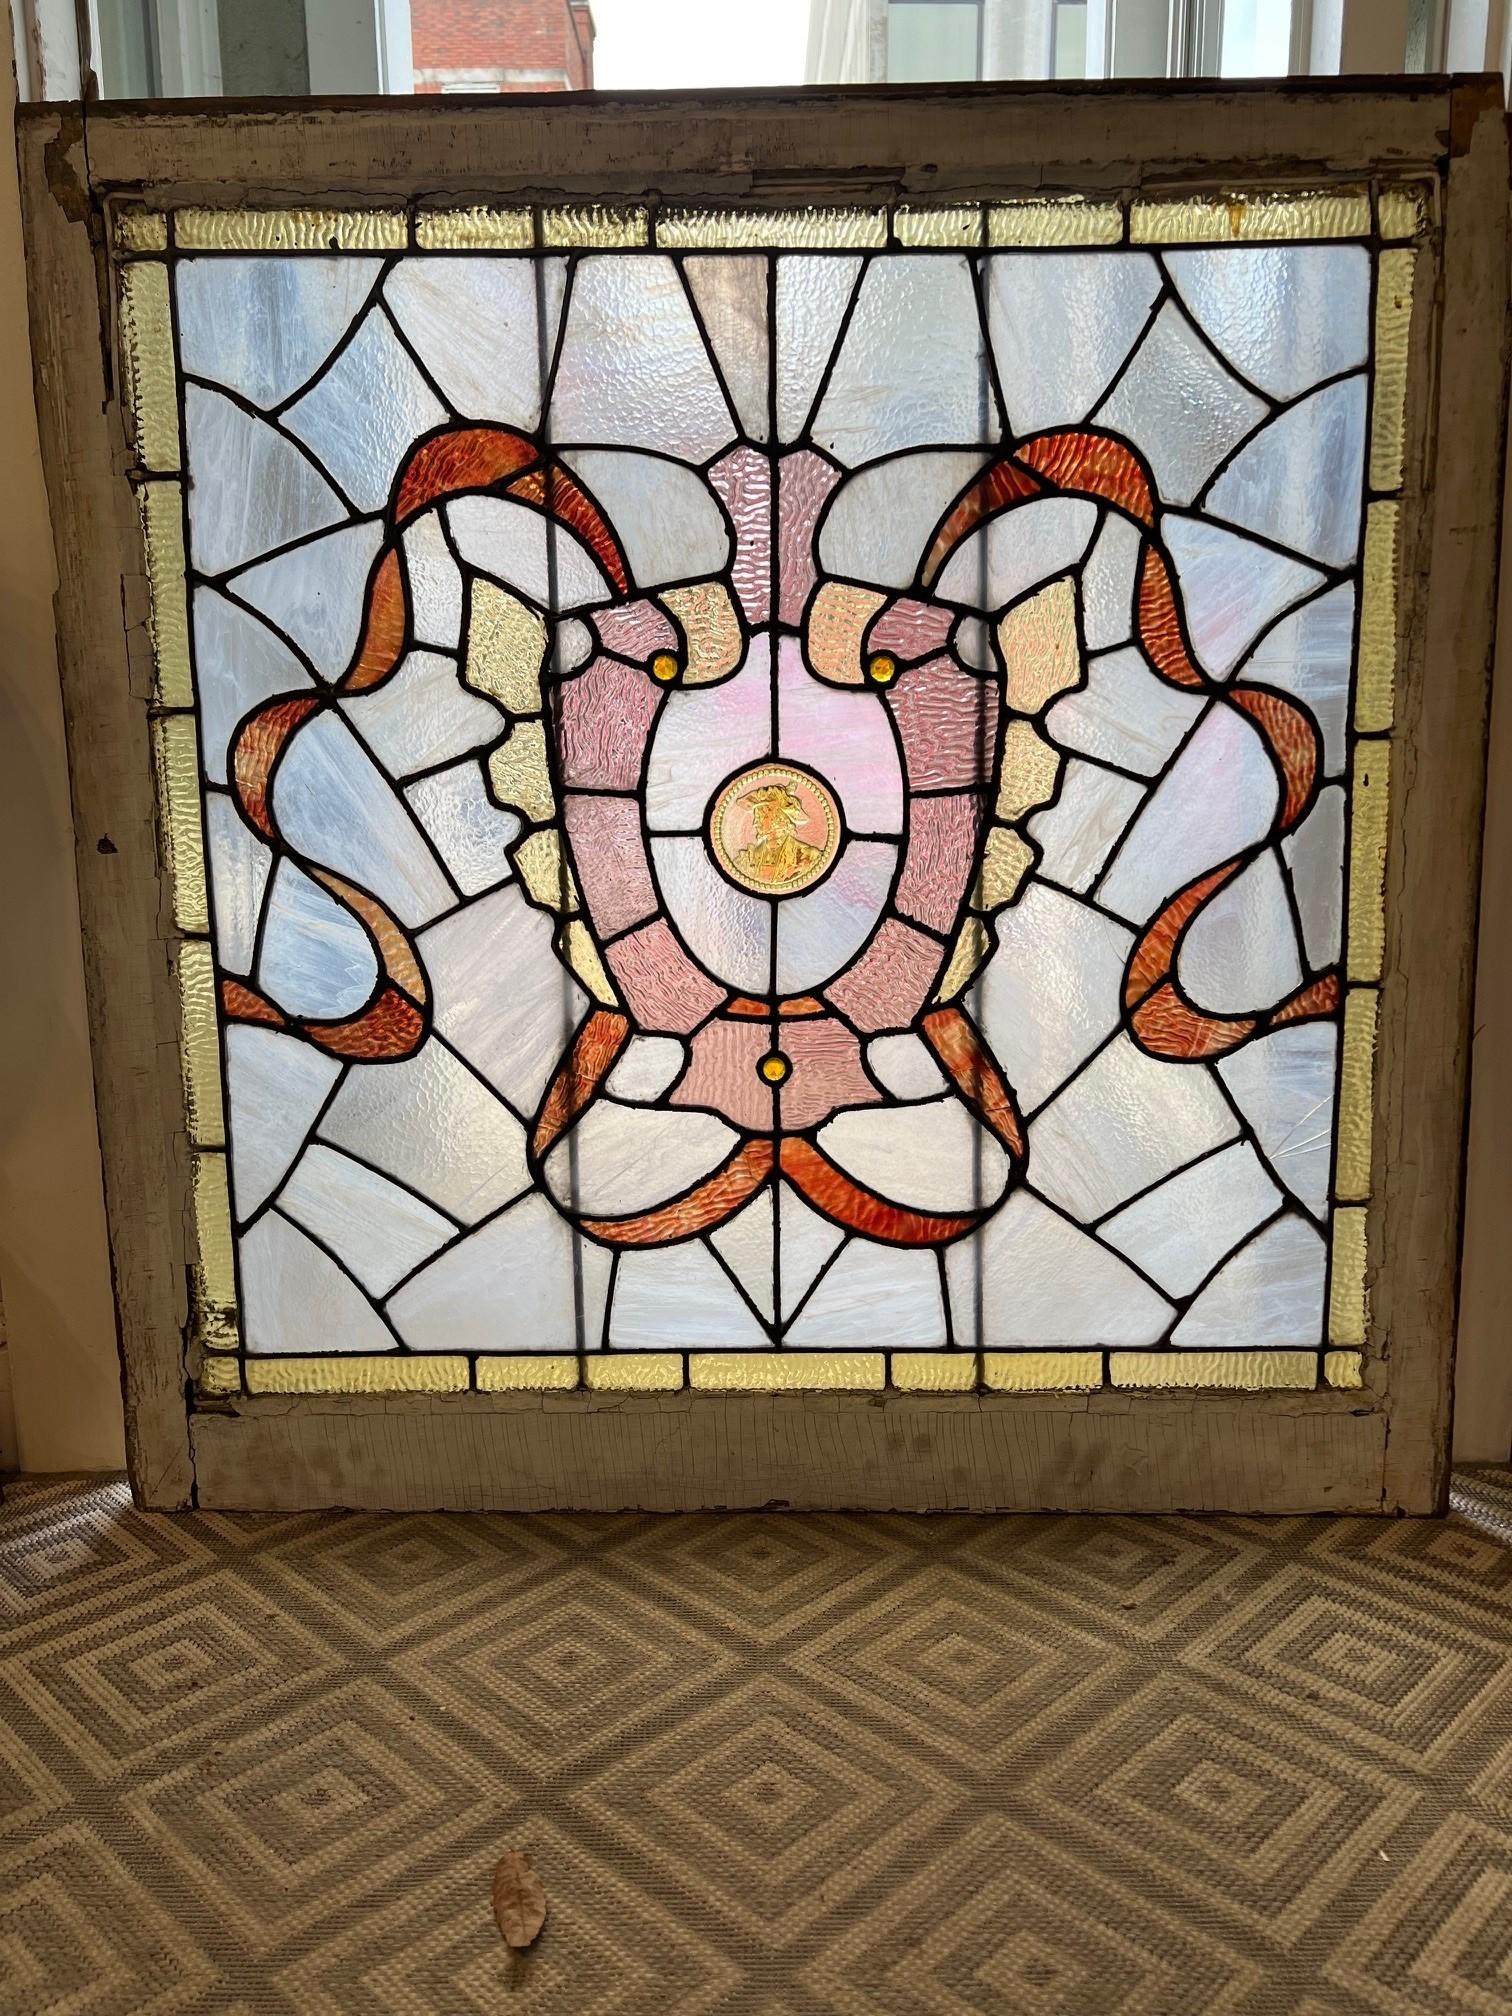 Beautiful antique stained glass window with center Victorian bust. Not sure who's in the center but it's a great looking and unusual piece looks like a gold coin. It's a nice bright colorful window originally a double hung window salvaged from an